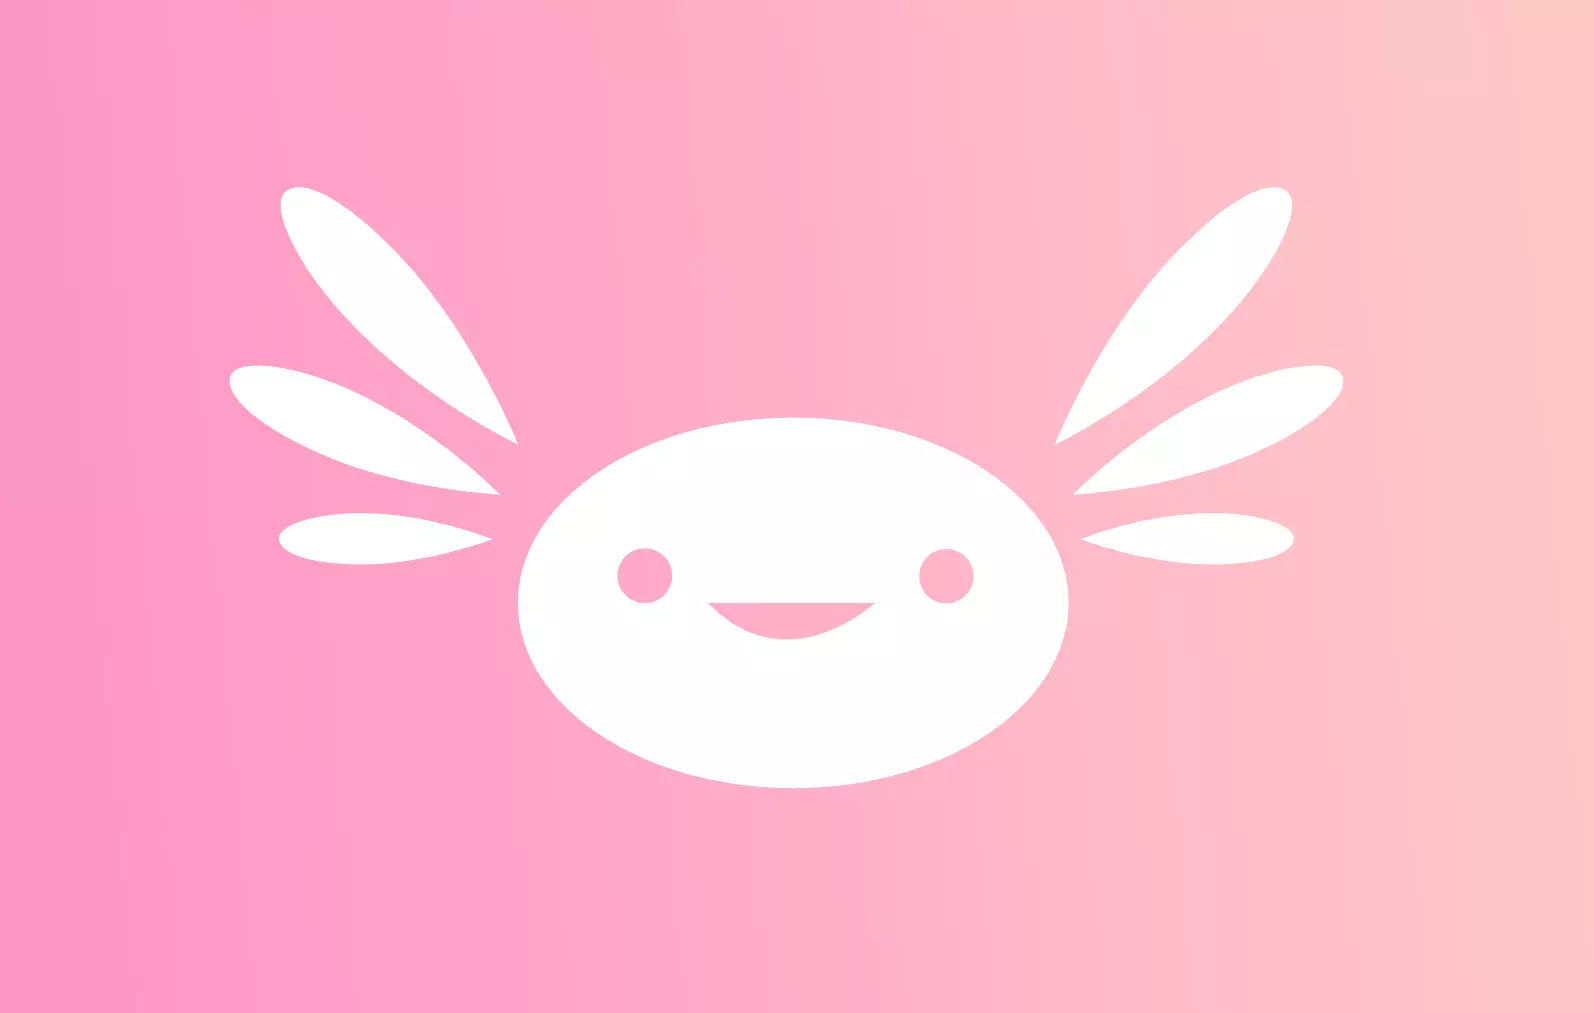 30+ Fun Axolotl Facts You Probably Didn't Know